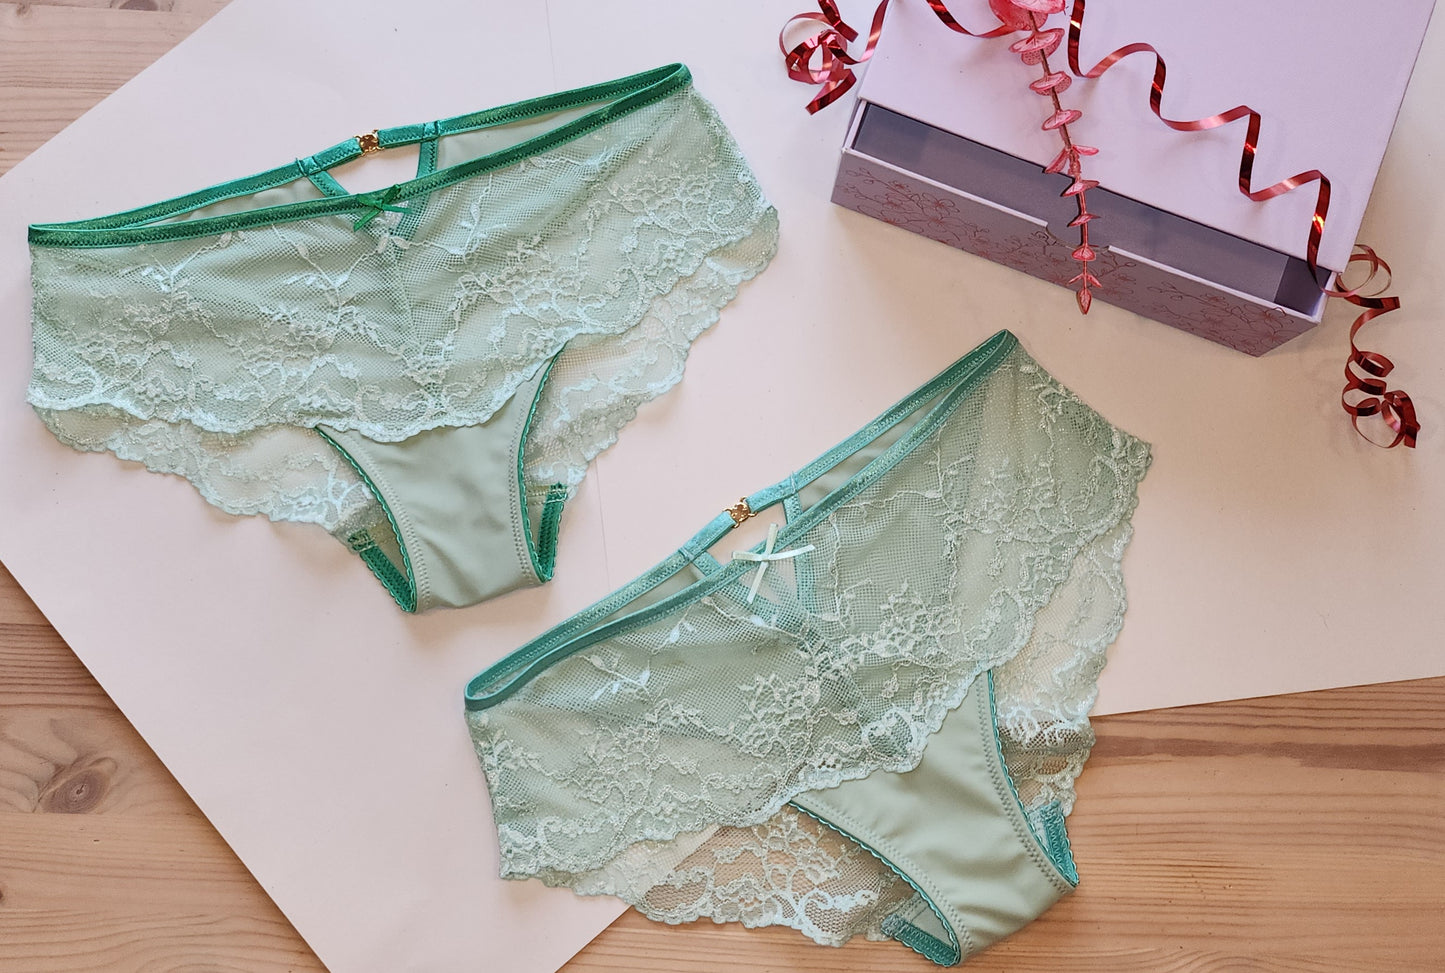 Offer of the month for May. 15% discount will be charged upon checkout. Large sewing set for 2x bras and panties or sewing package with <tc>lace</tc>, microfiber and Powernet in green. IDnsx1